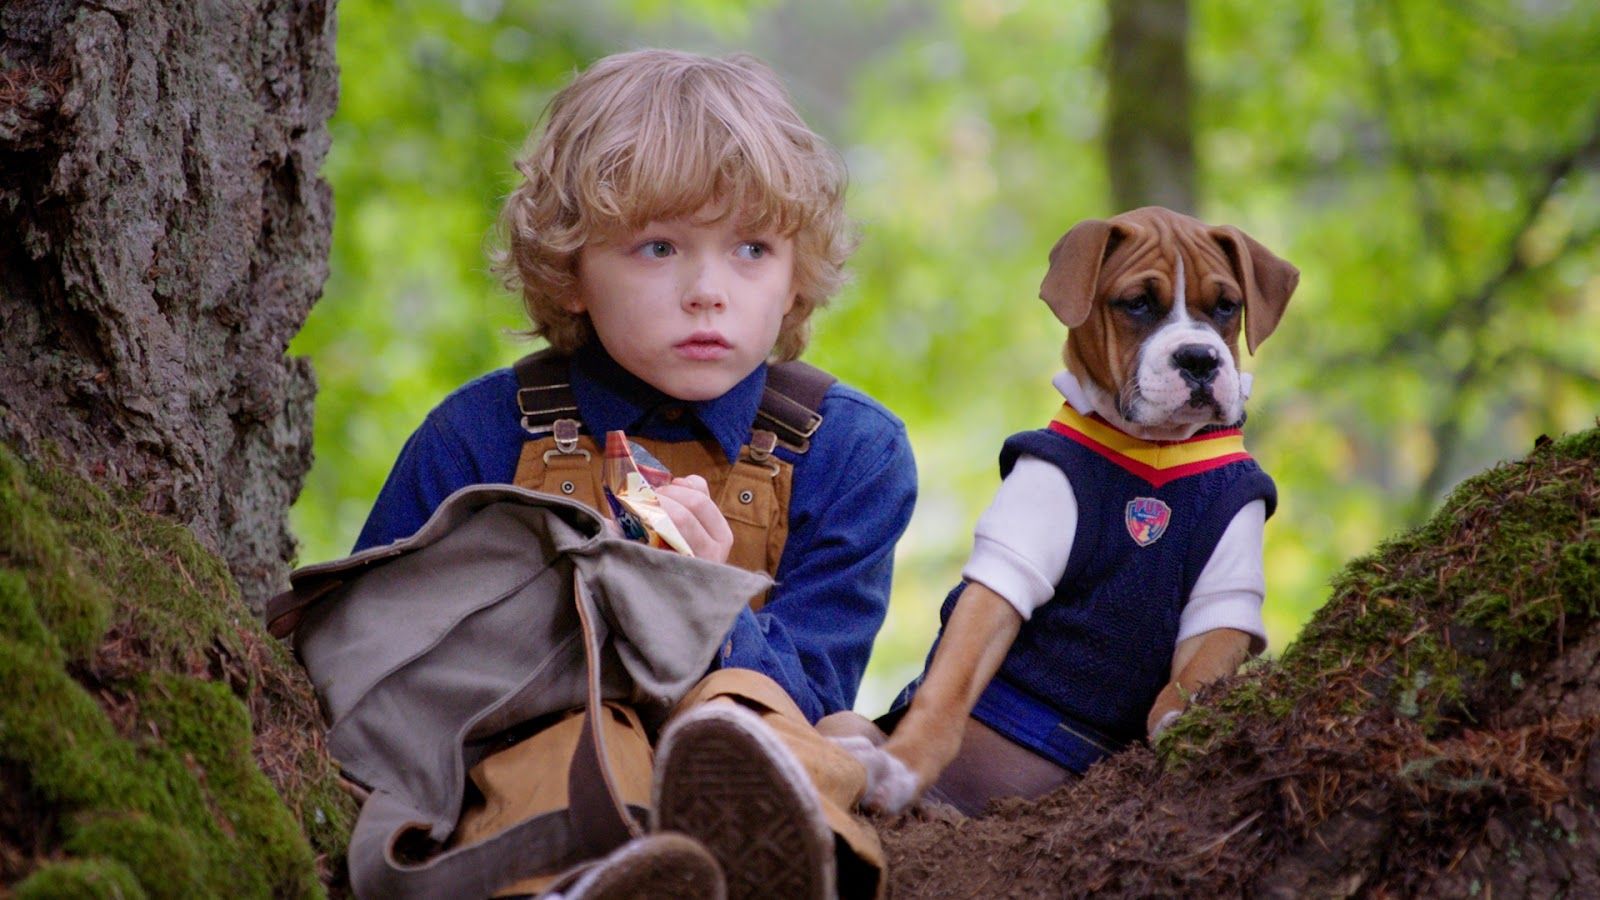 Pup Academy From Air Bud Entertainment Coming to Disney Channel This August